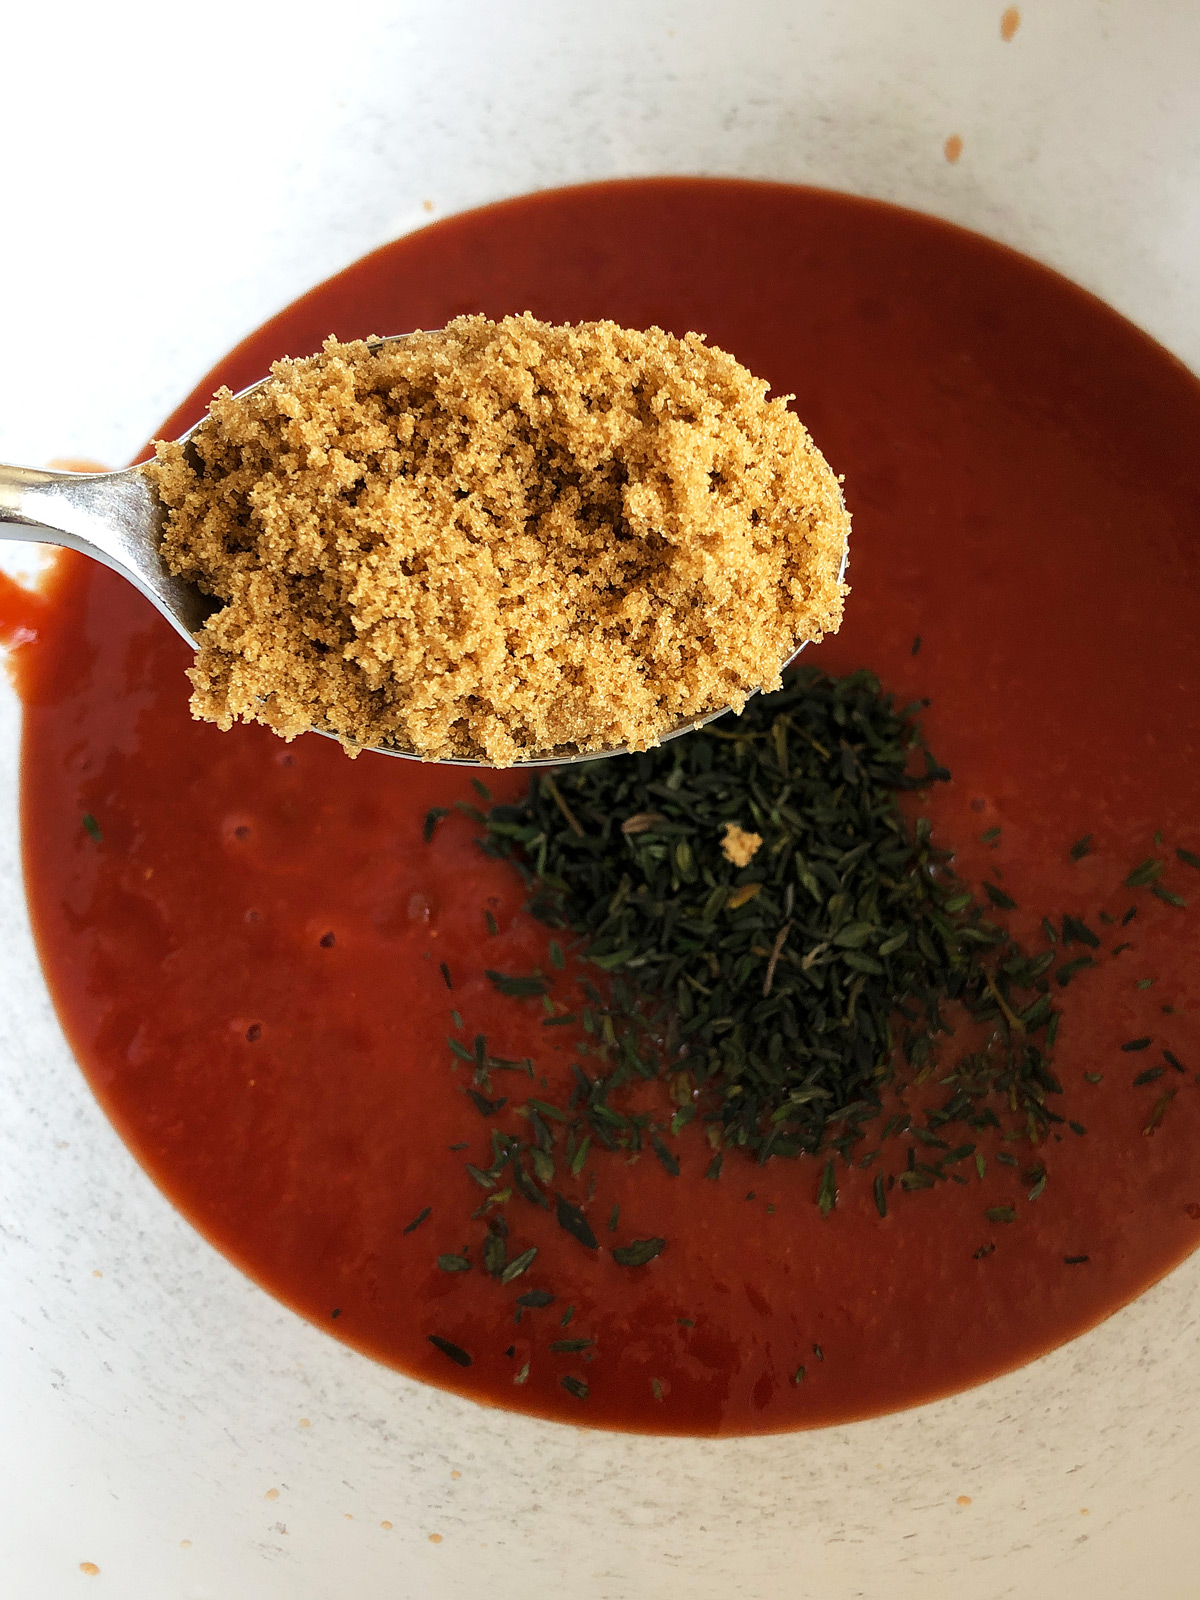 A spoonful of muscovado sugar above a bowl with passata and herbs.